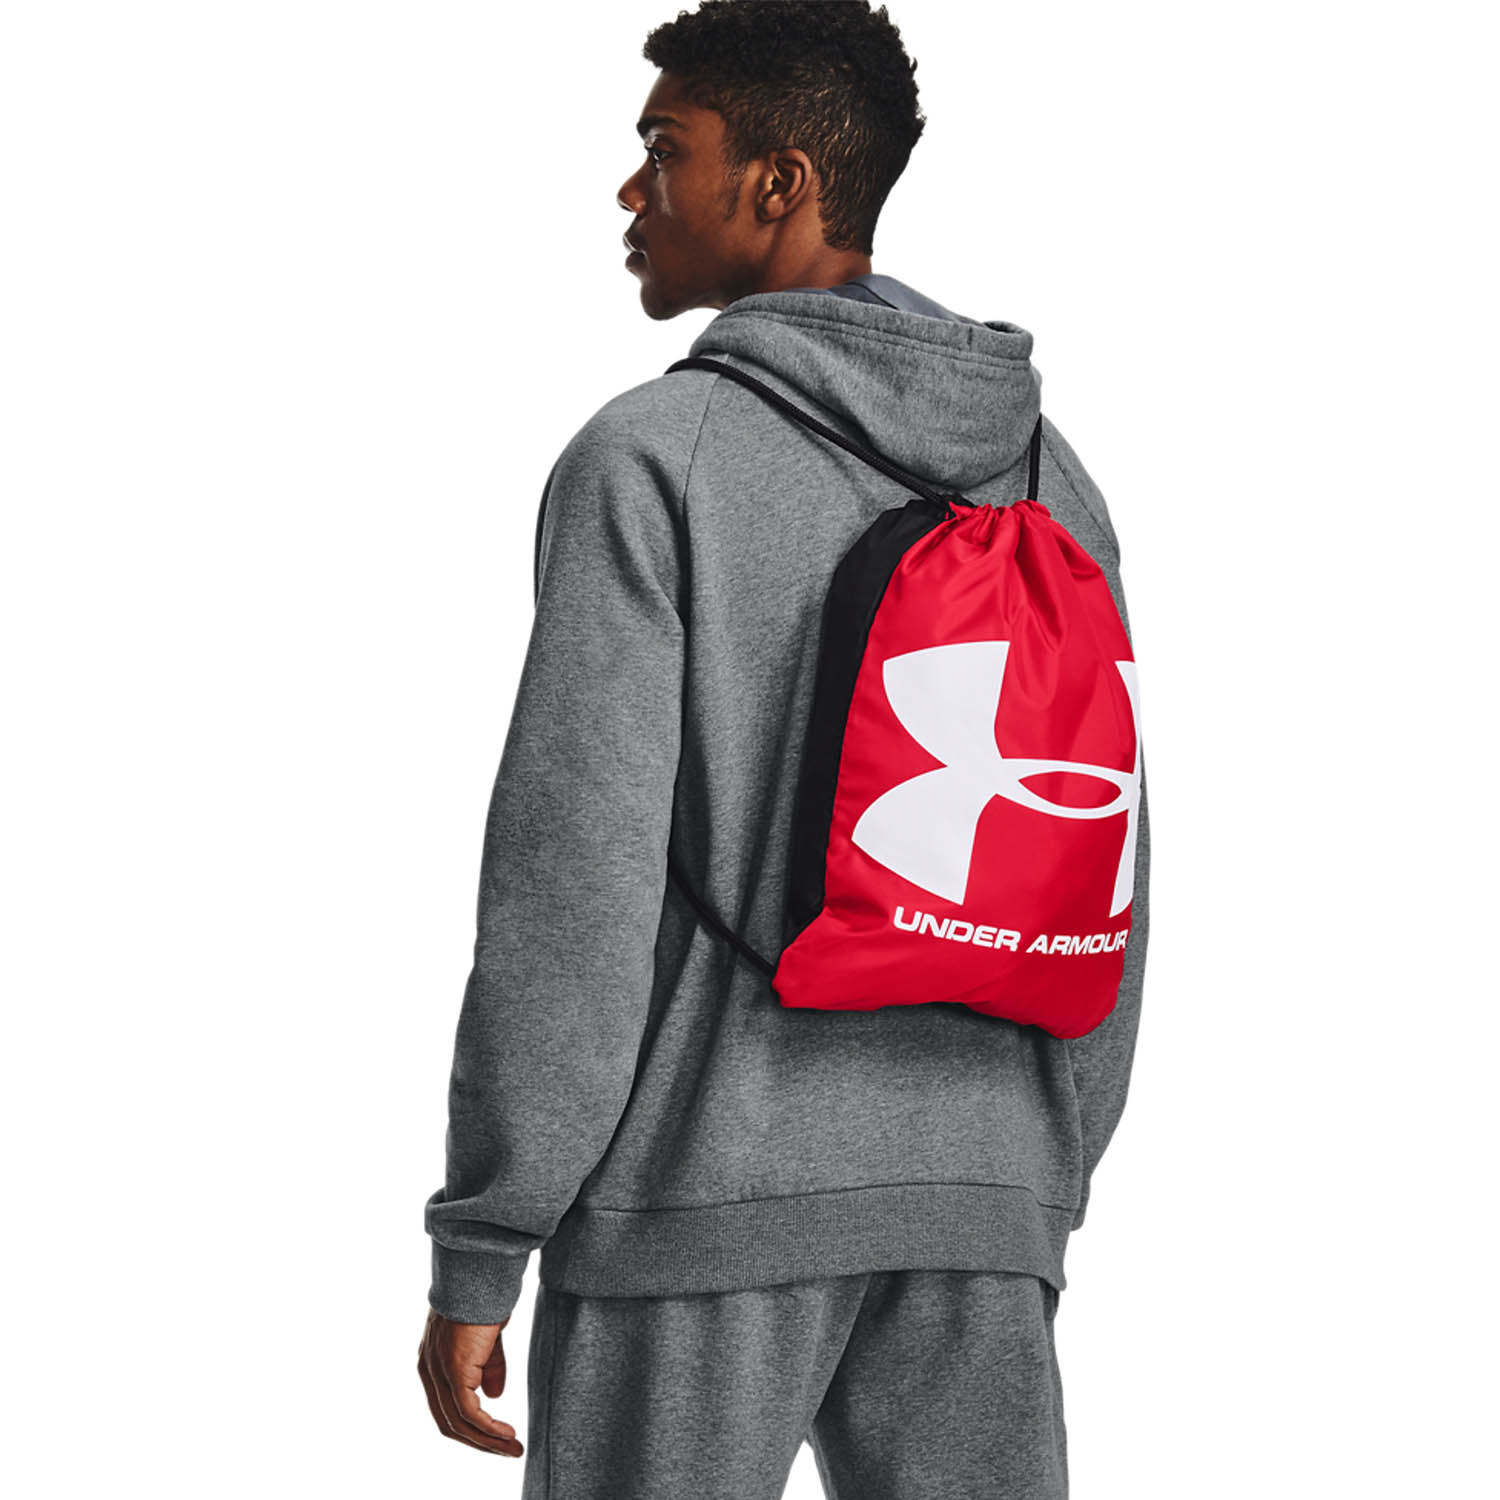 Under Armour OzSee Sacca - Red